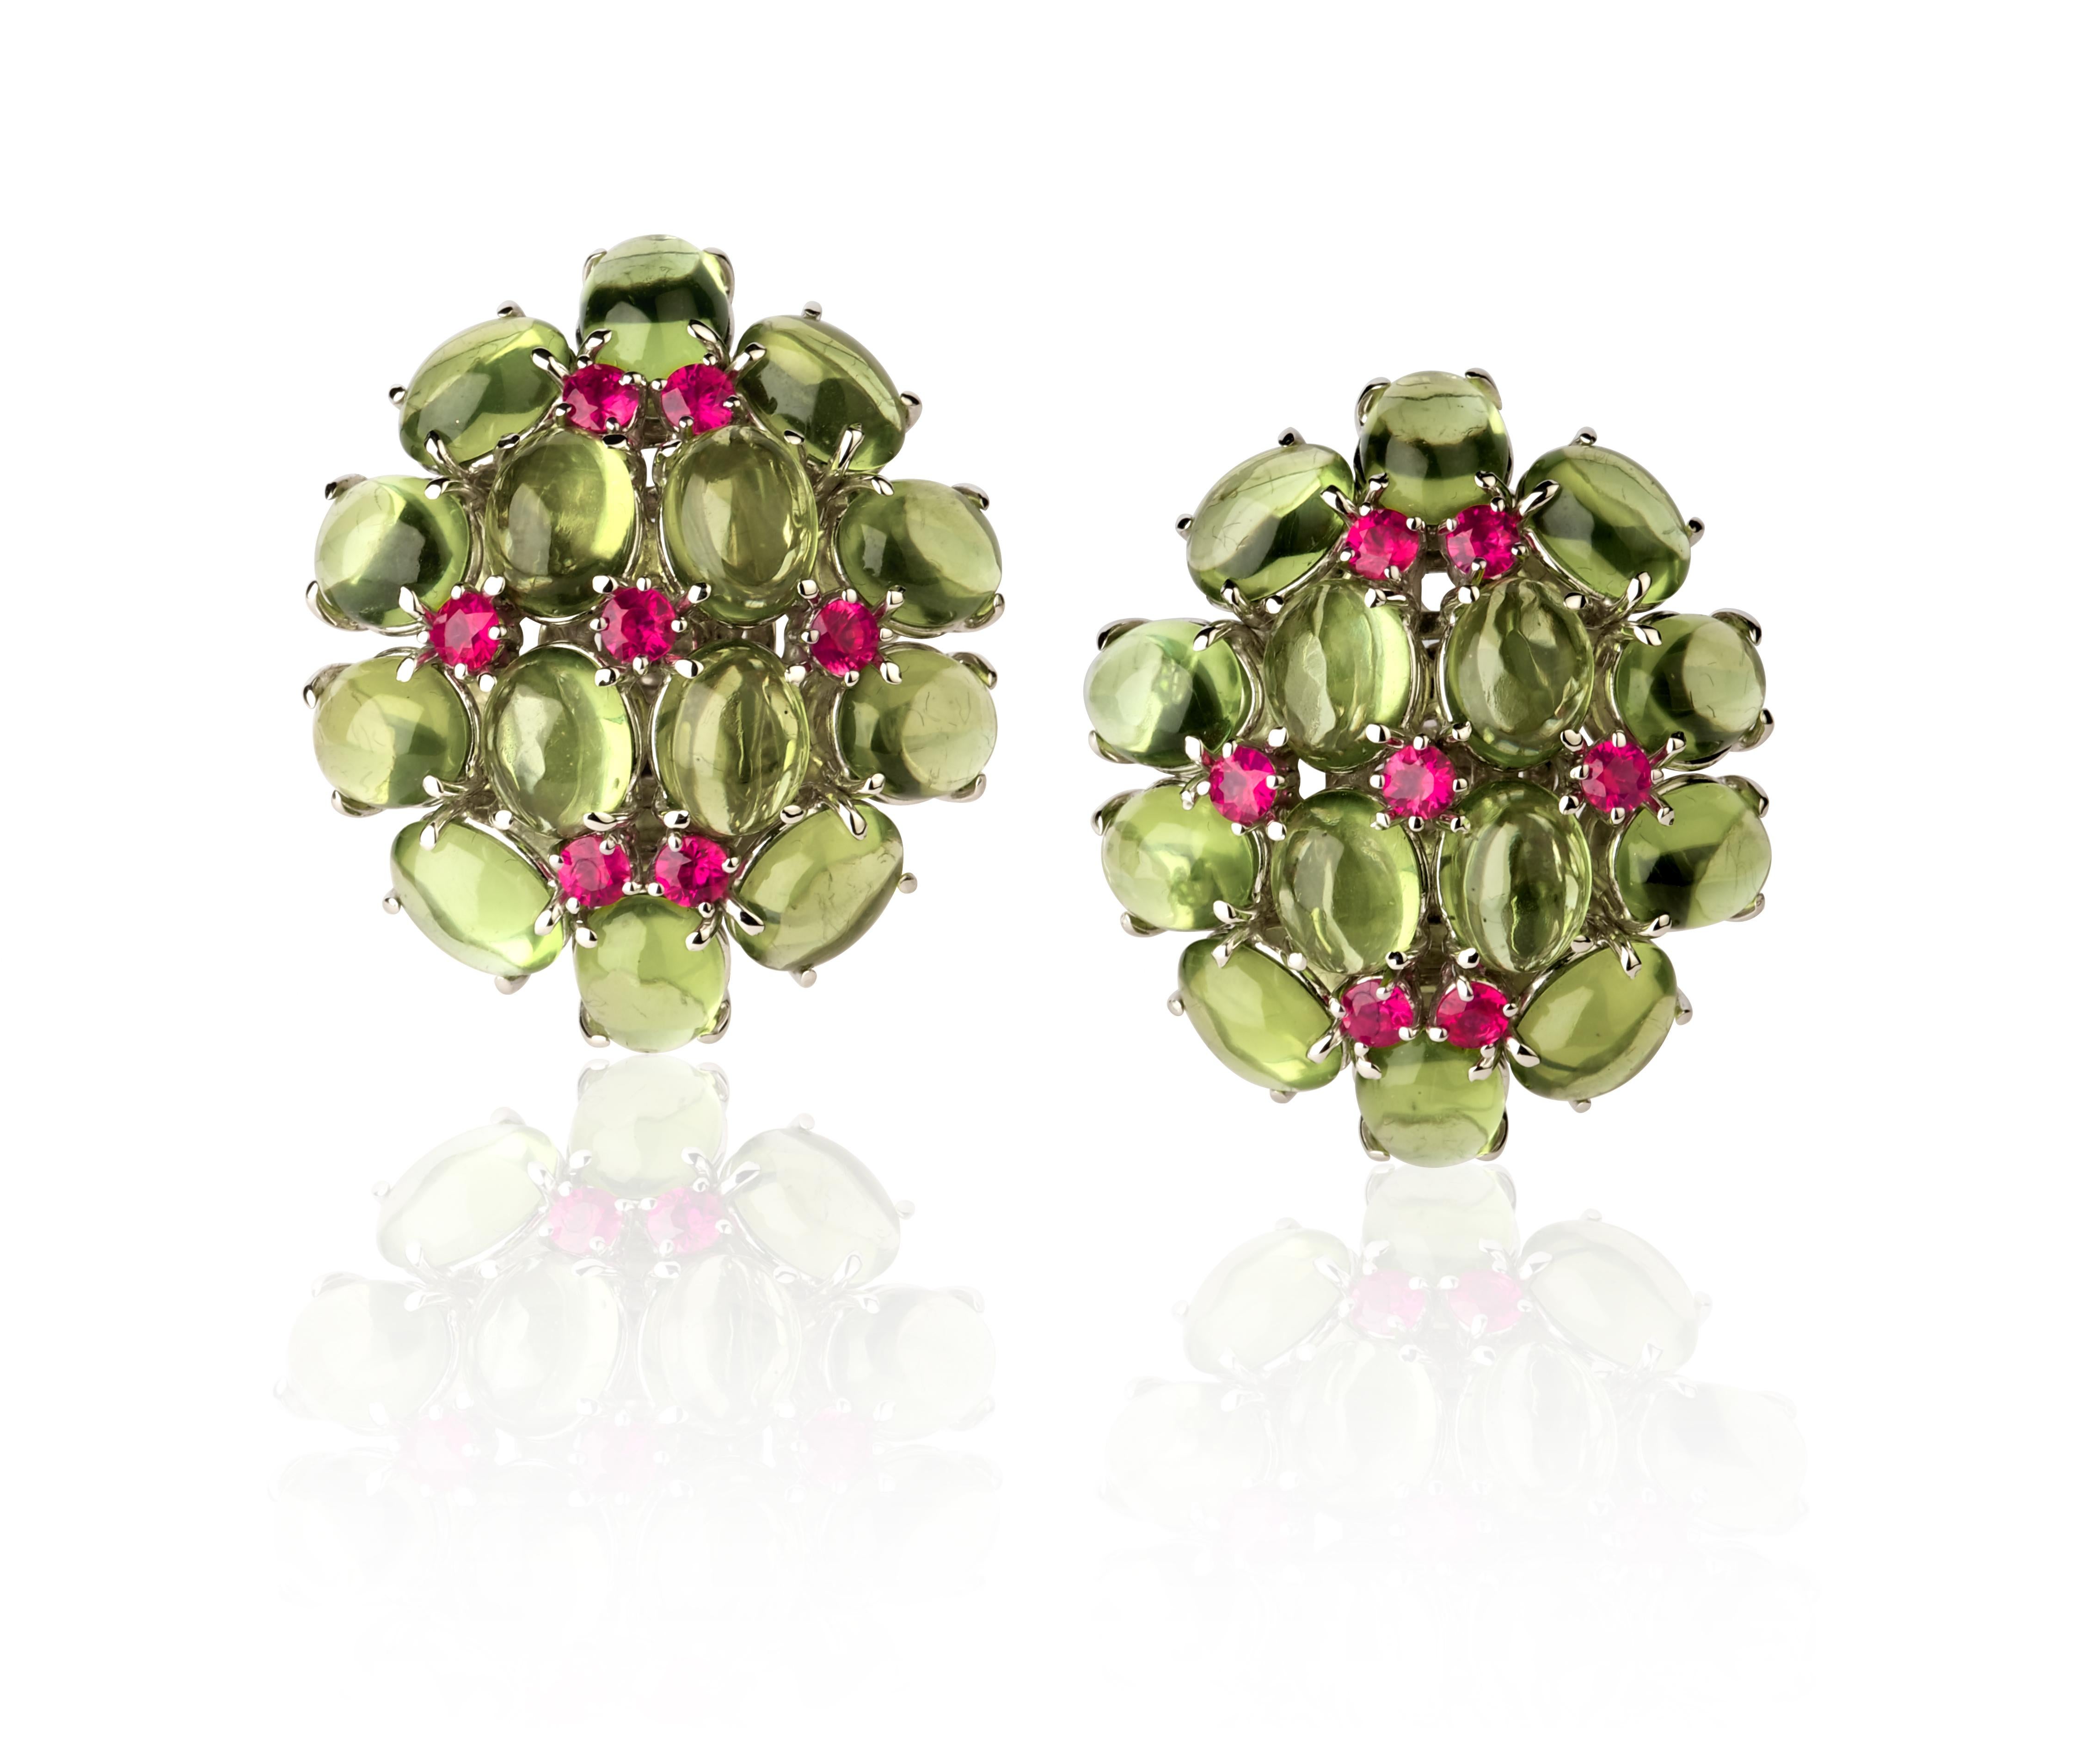 Taille brillant Boucles d'oreilles ovales ANGELETTI PRIVATE COLLECTION or péridots roses saphirs en vente